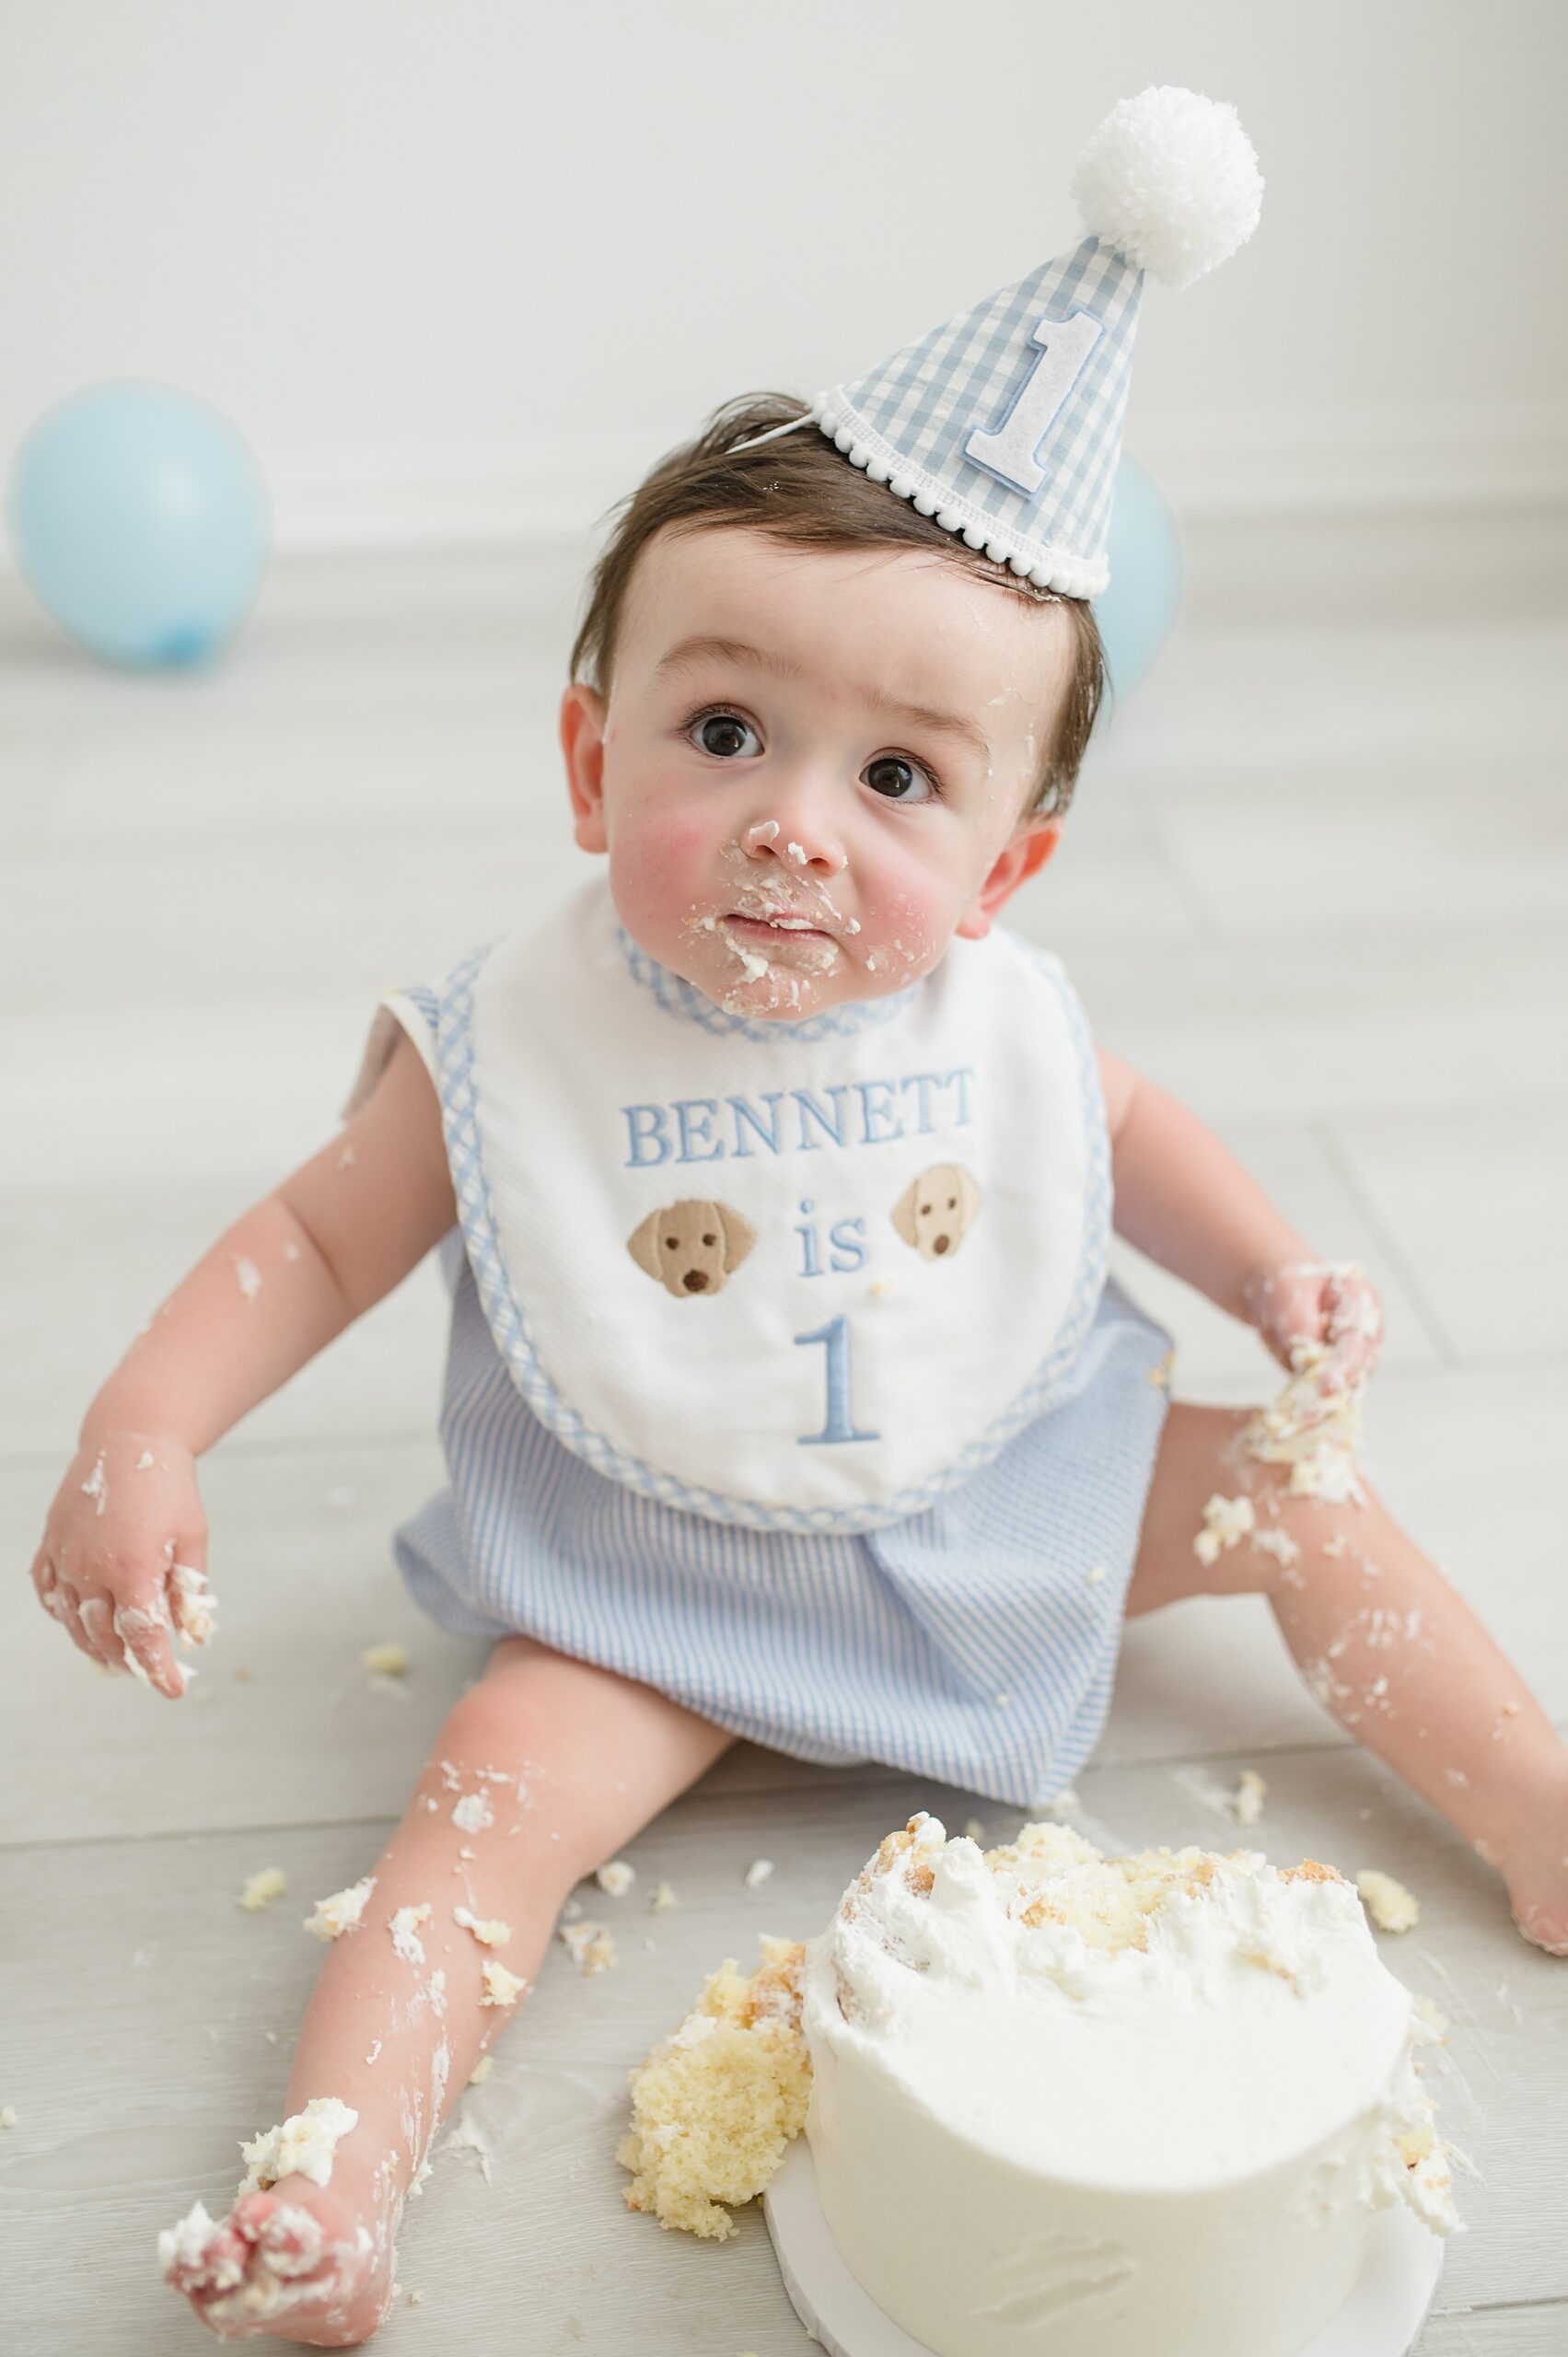 little boy covered in cake from cake smash session photographed by Lindsey Dutton Photography, a Dallas newborn photographer
